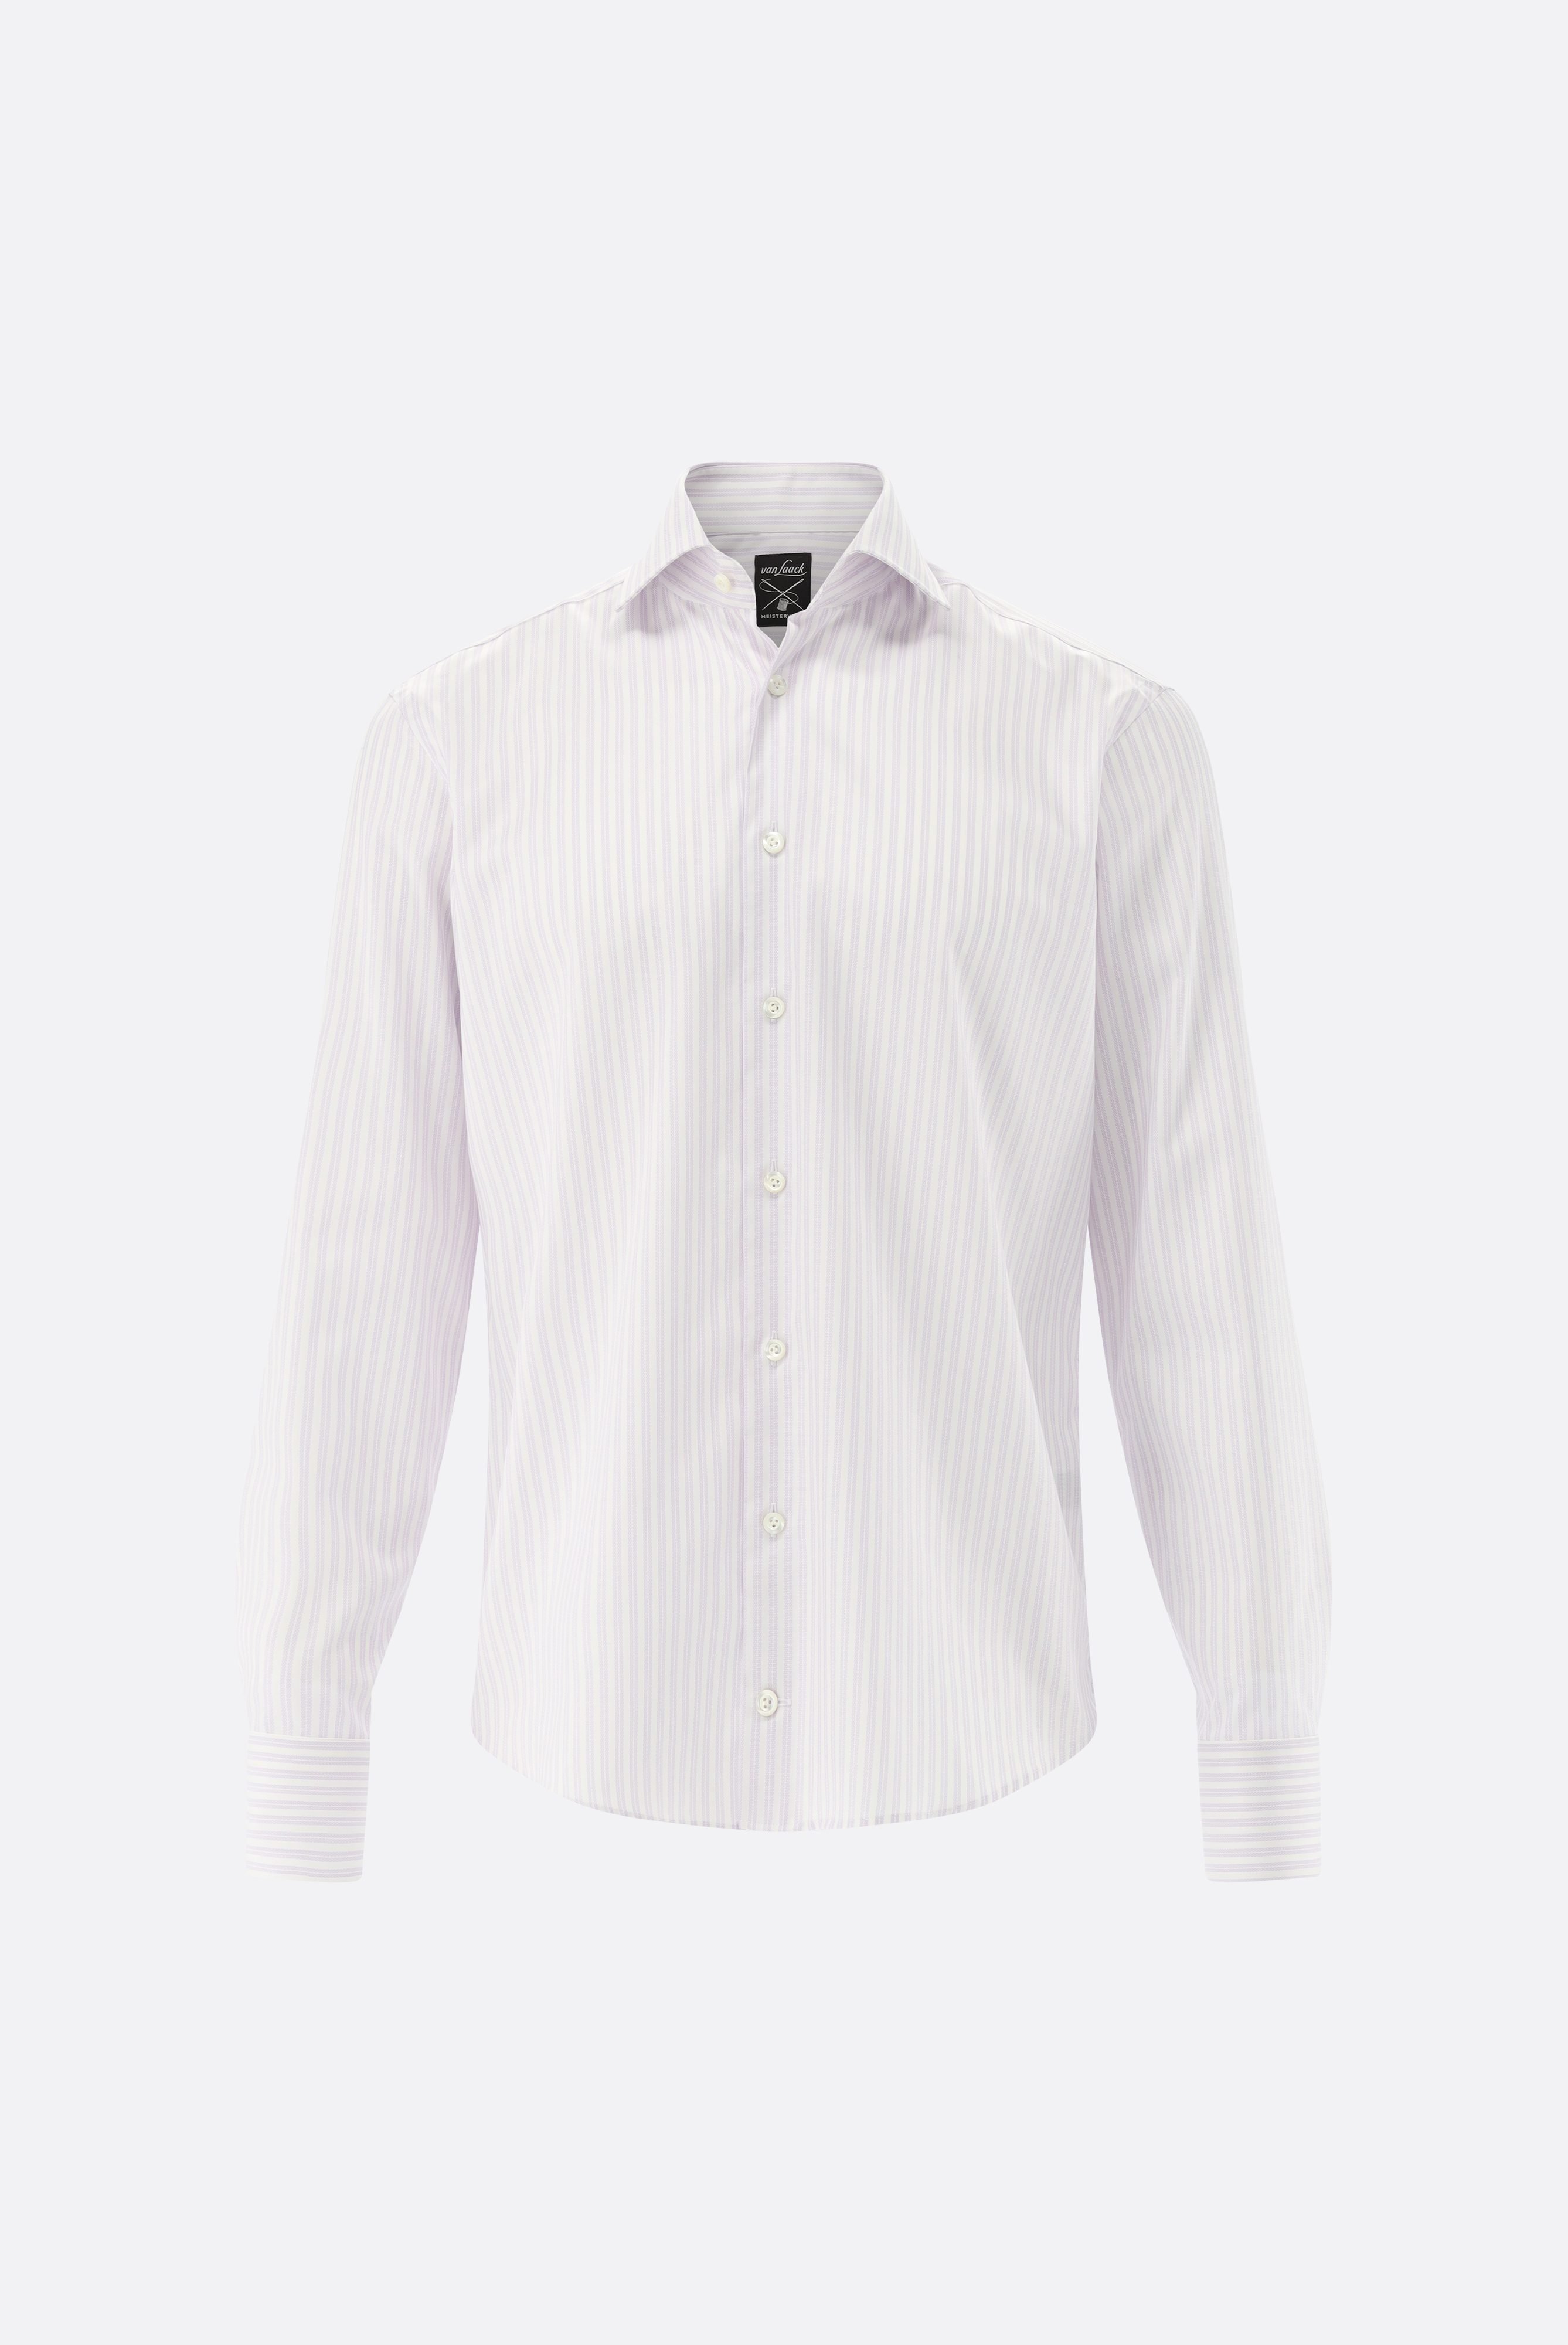 Easy Iron Shirts+Striped Wrinkle Free Shirt Tailor Fit+20.2020.BQ.161106.006.38